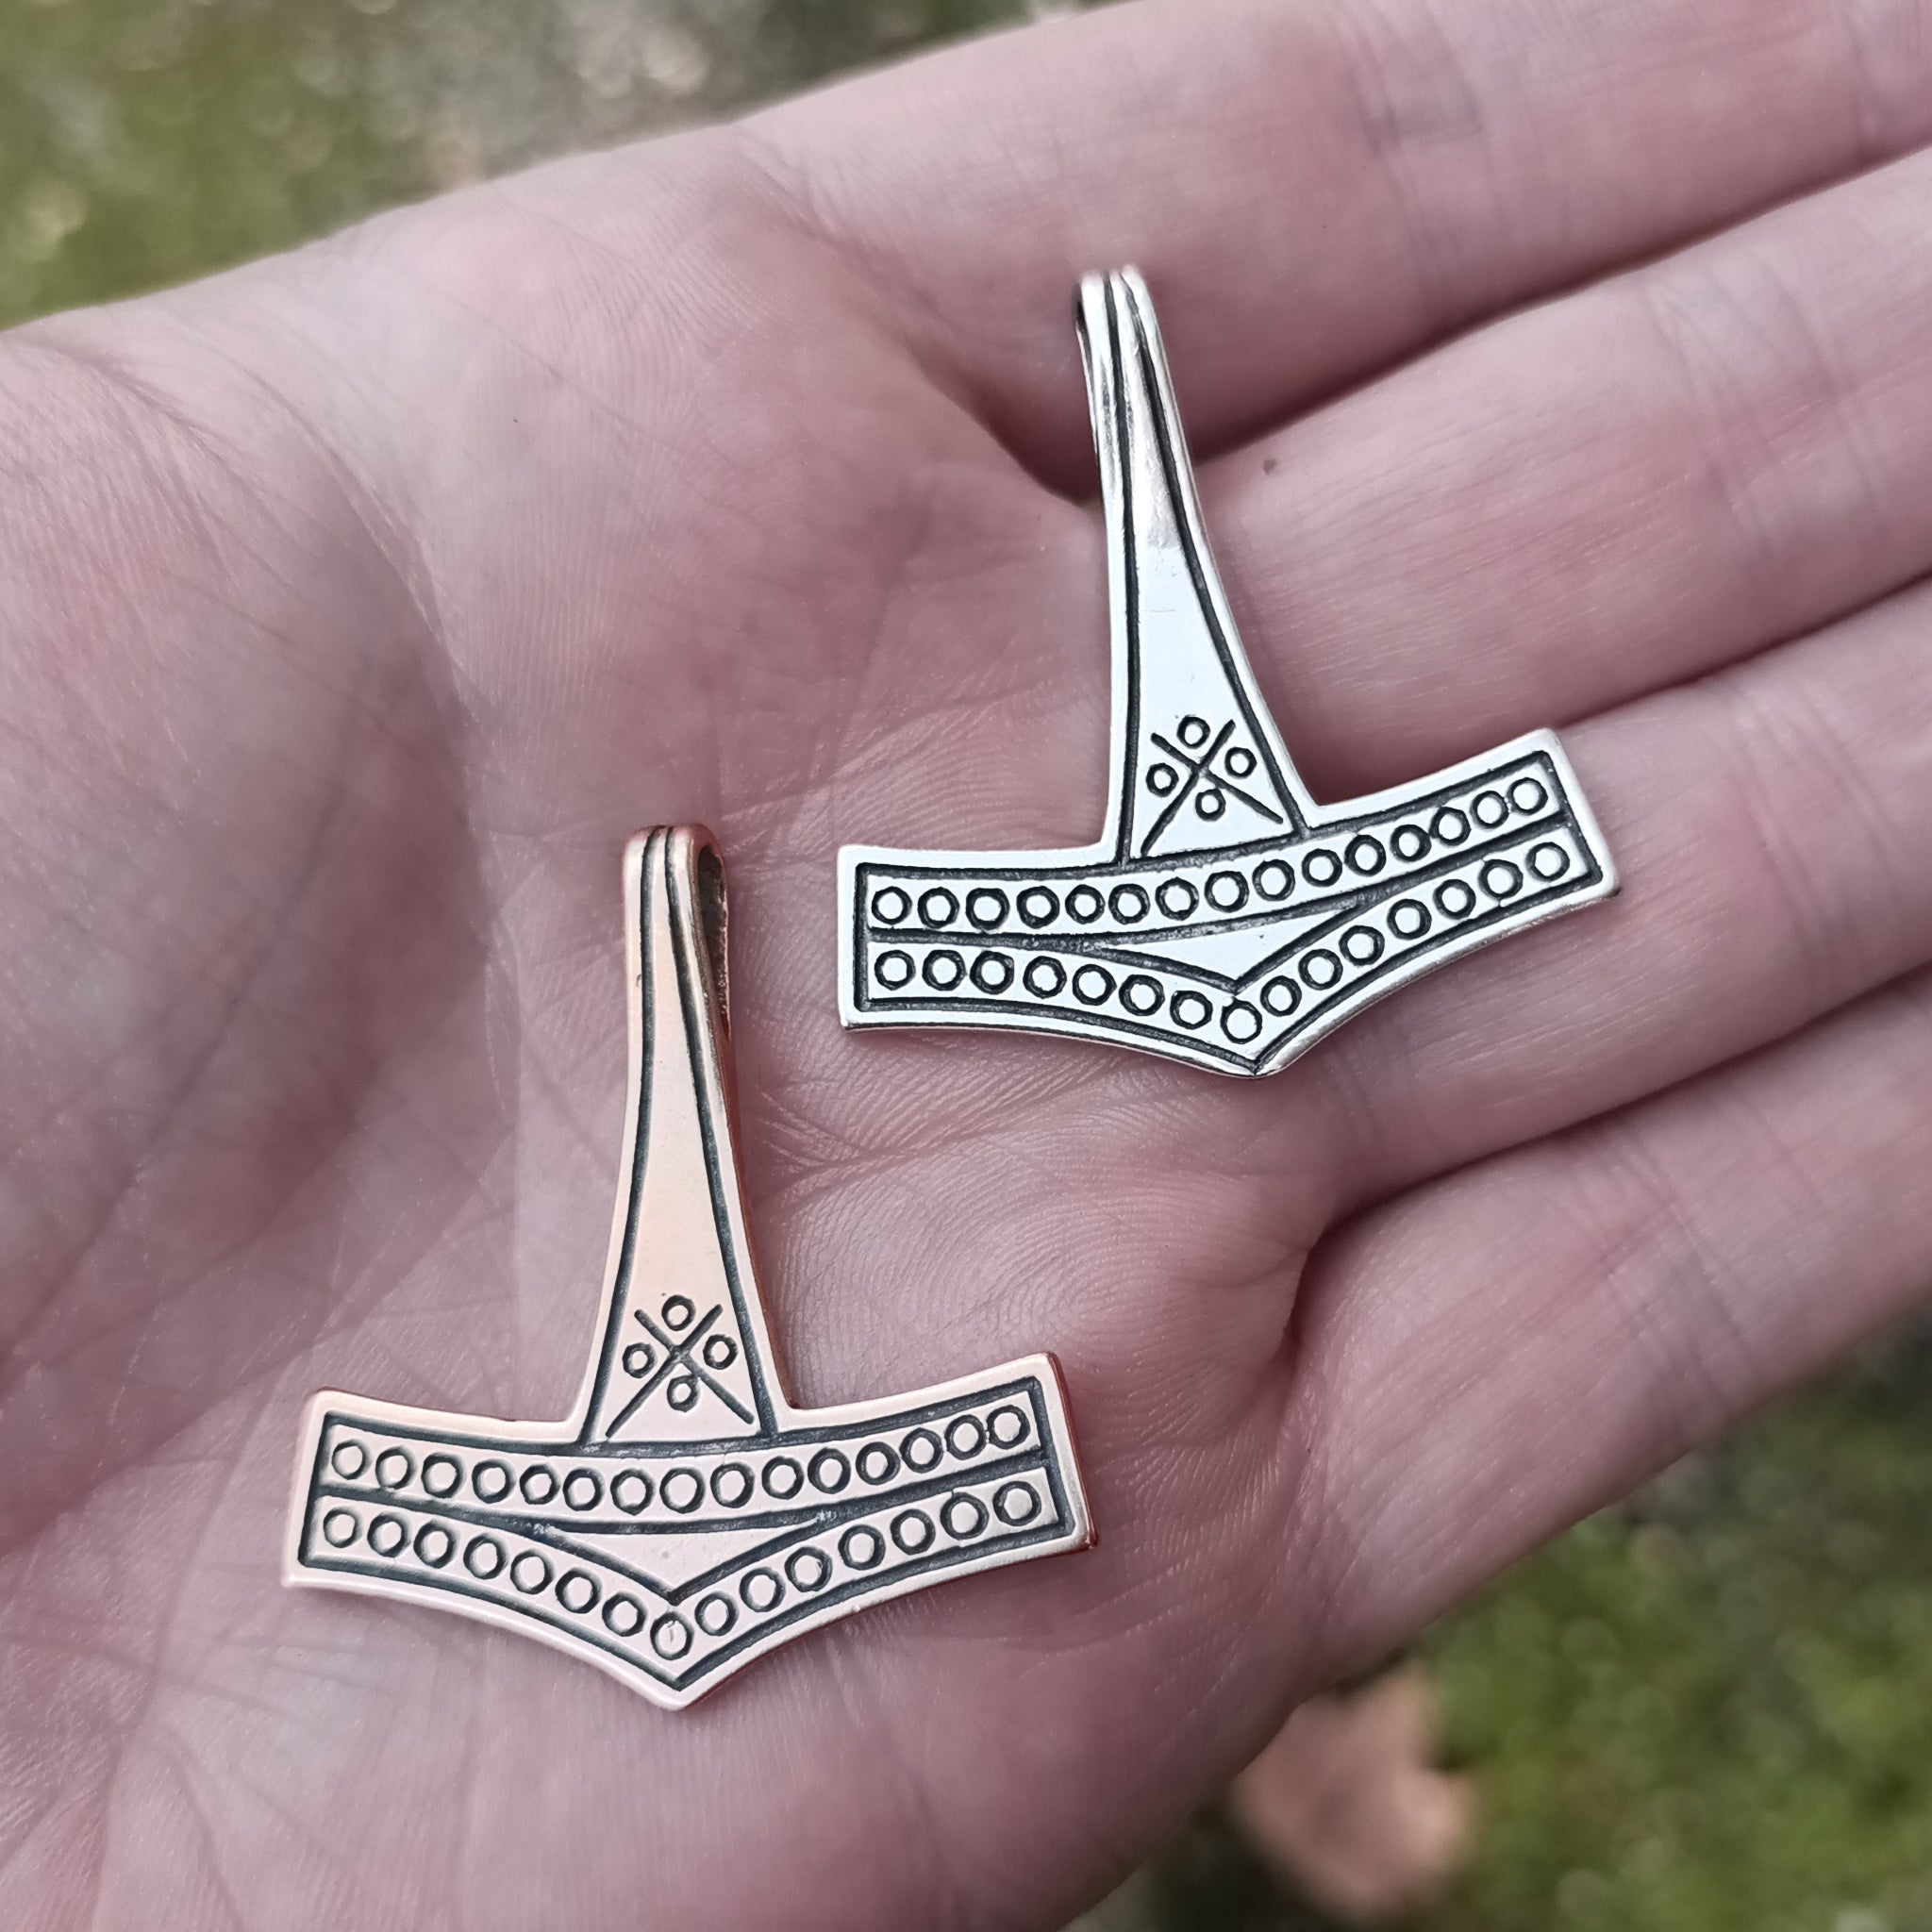 Large Rømersdal Replica Thors Hammer Pendants on Hand - Bronze and Silver